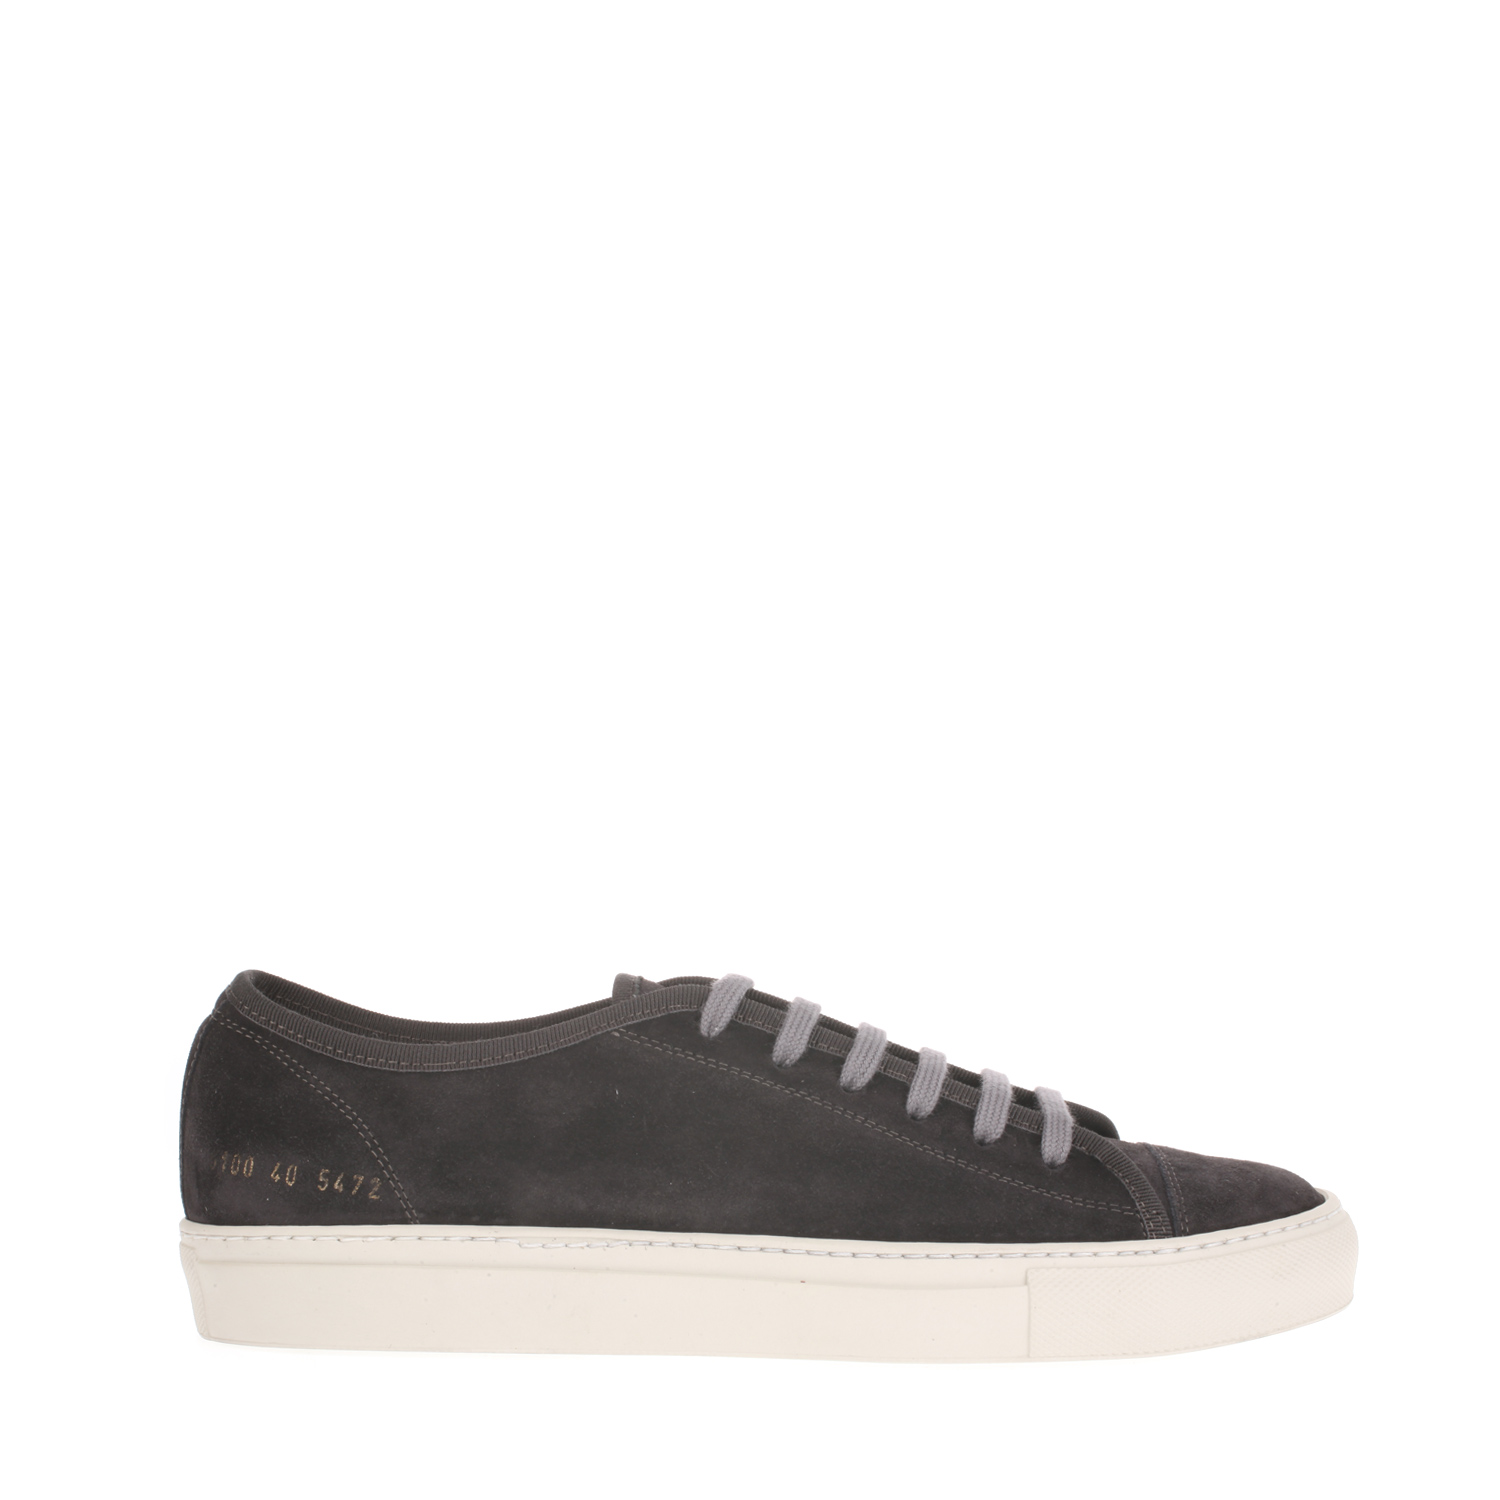 Common Projects Low Sneakers in Soft Suede with Cotton Laces and White ...